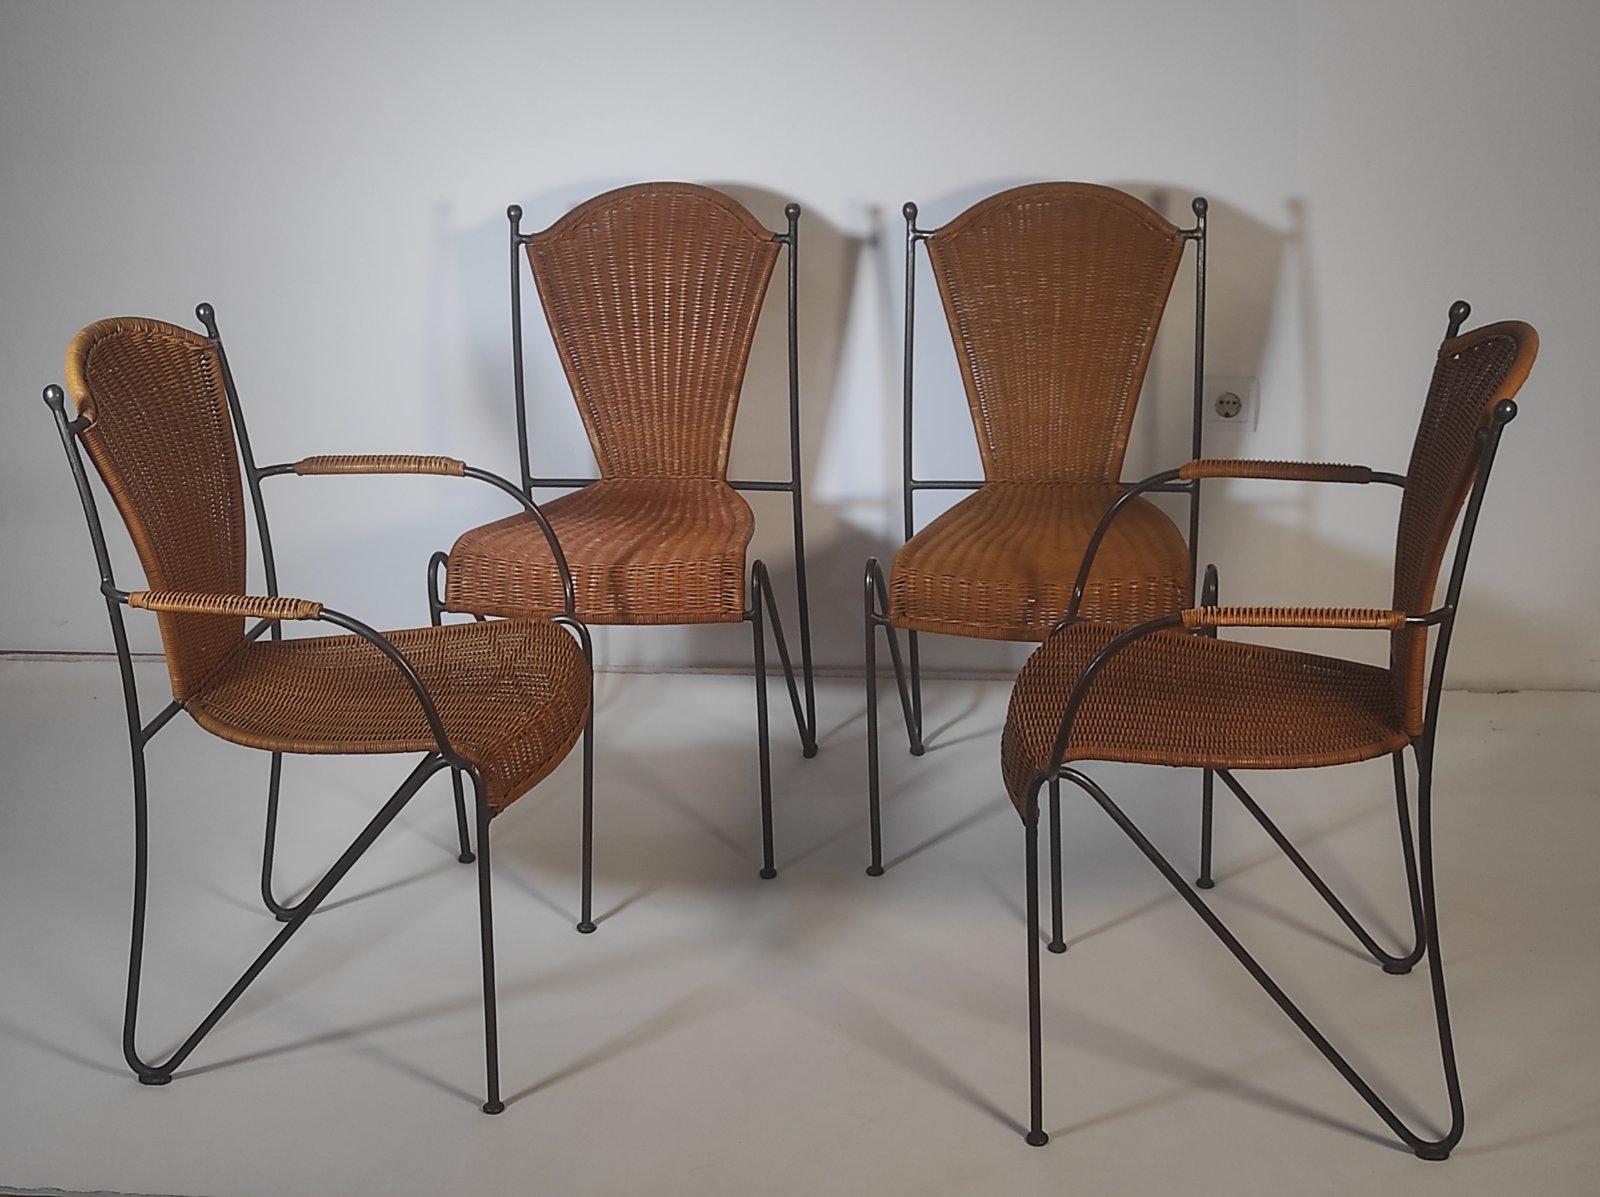 Mid-Century Modern  Set of Four Wicker and Iron Chair By Frederic Weinberg 1950s